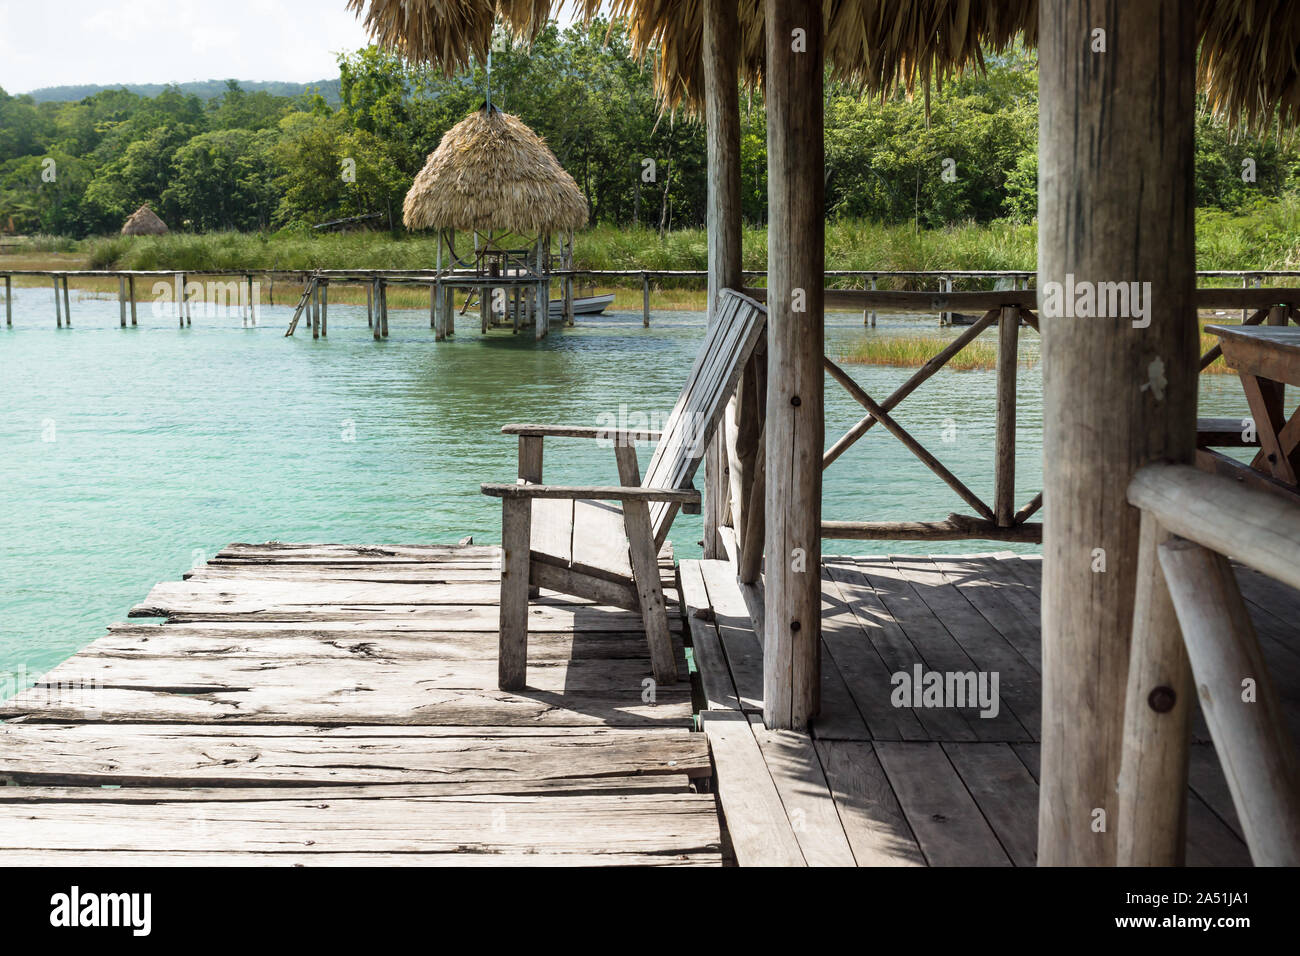 Lake dock with chair at a sunny day, El Remate, Guatemala Stock Photo